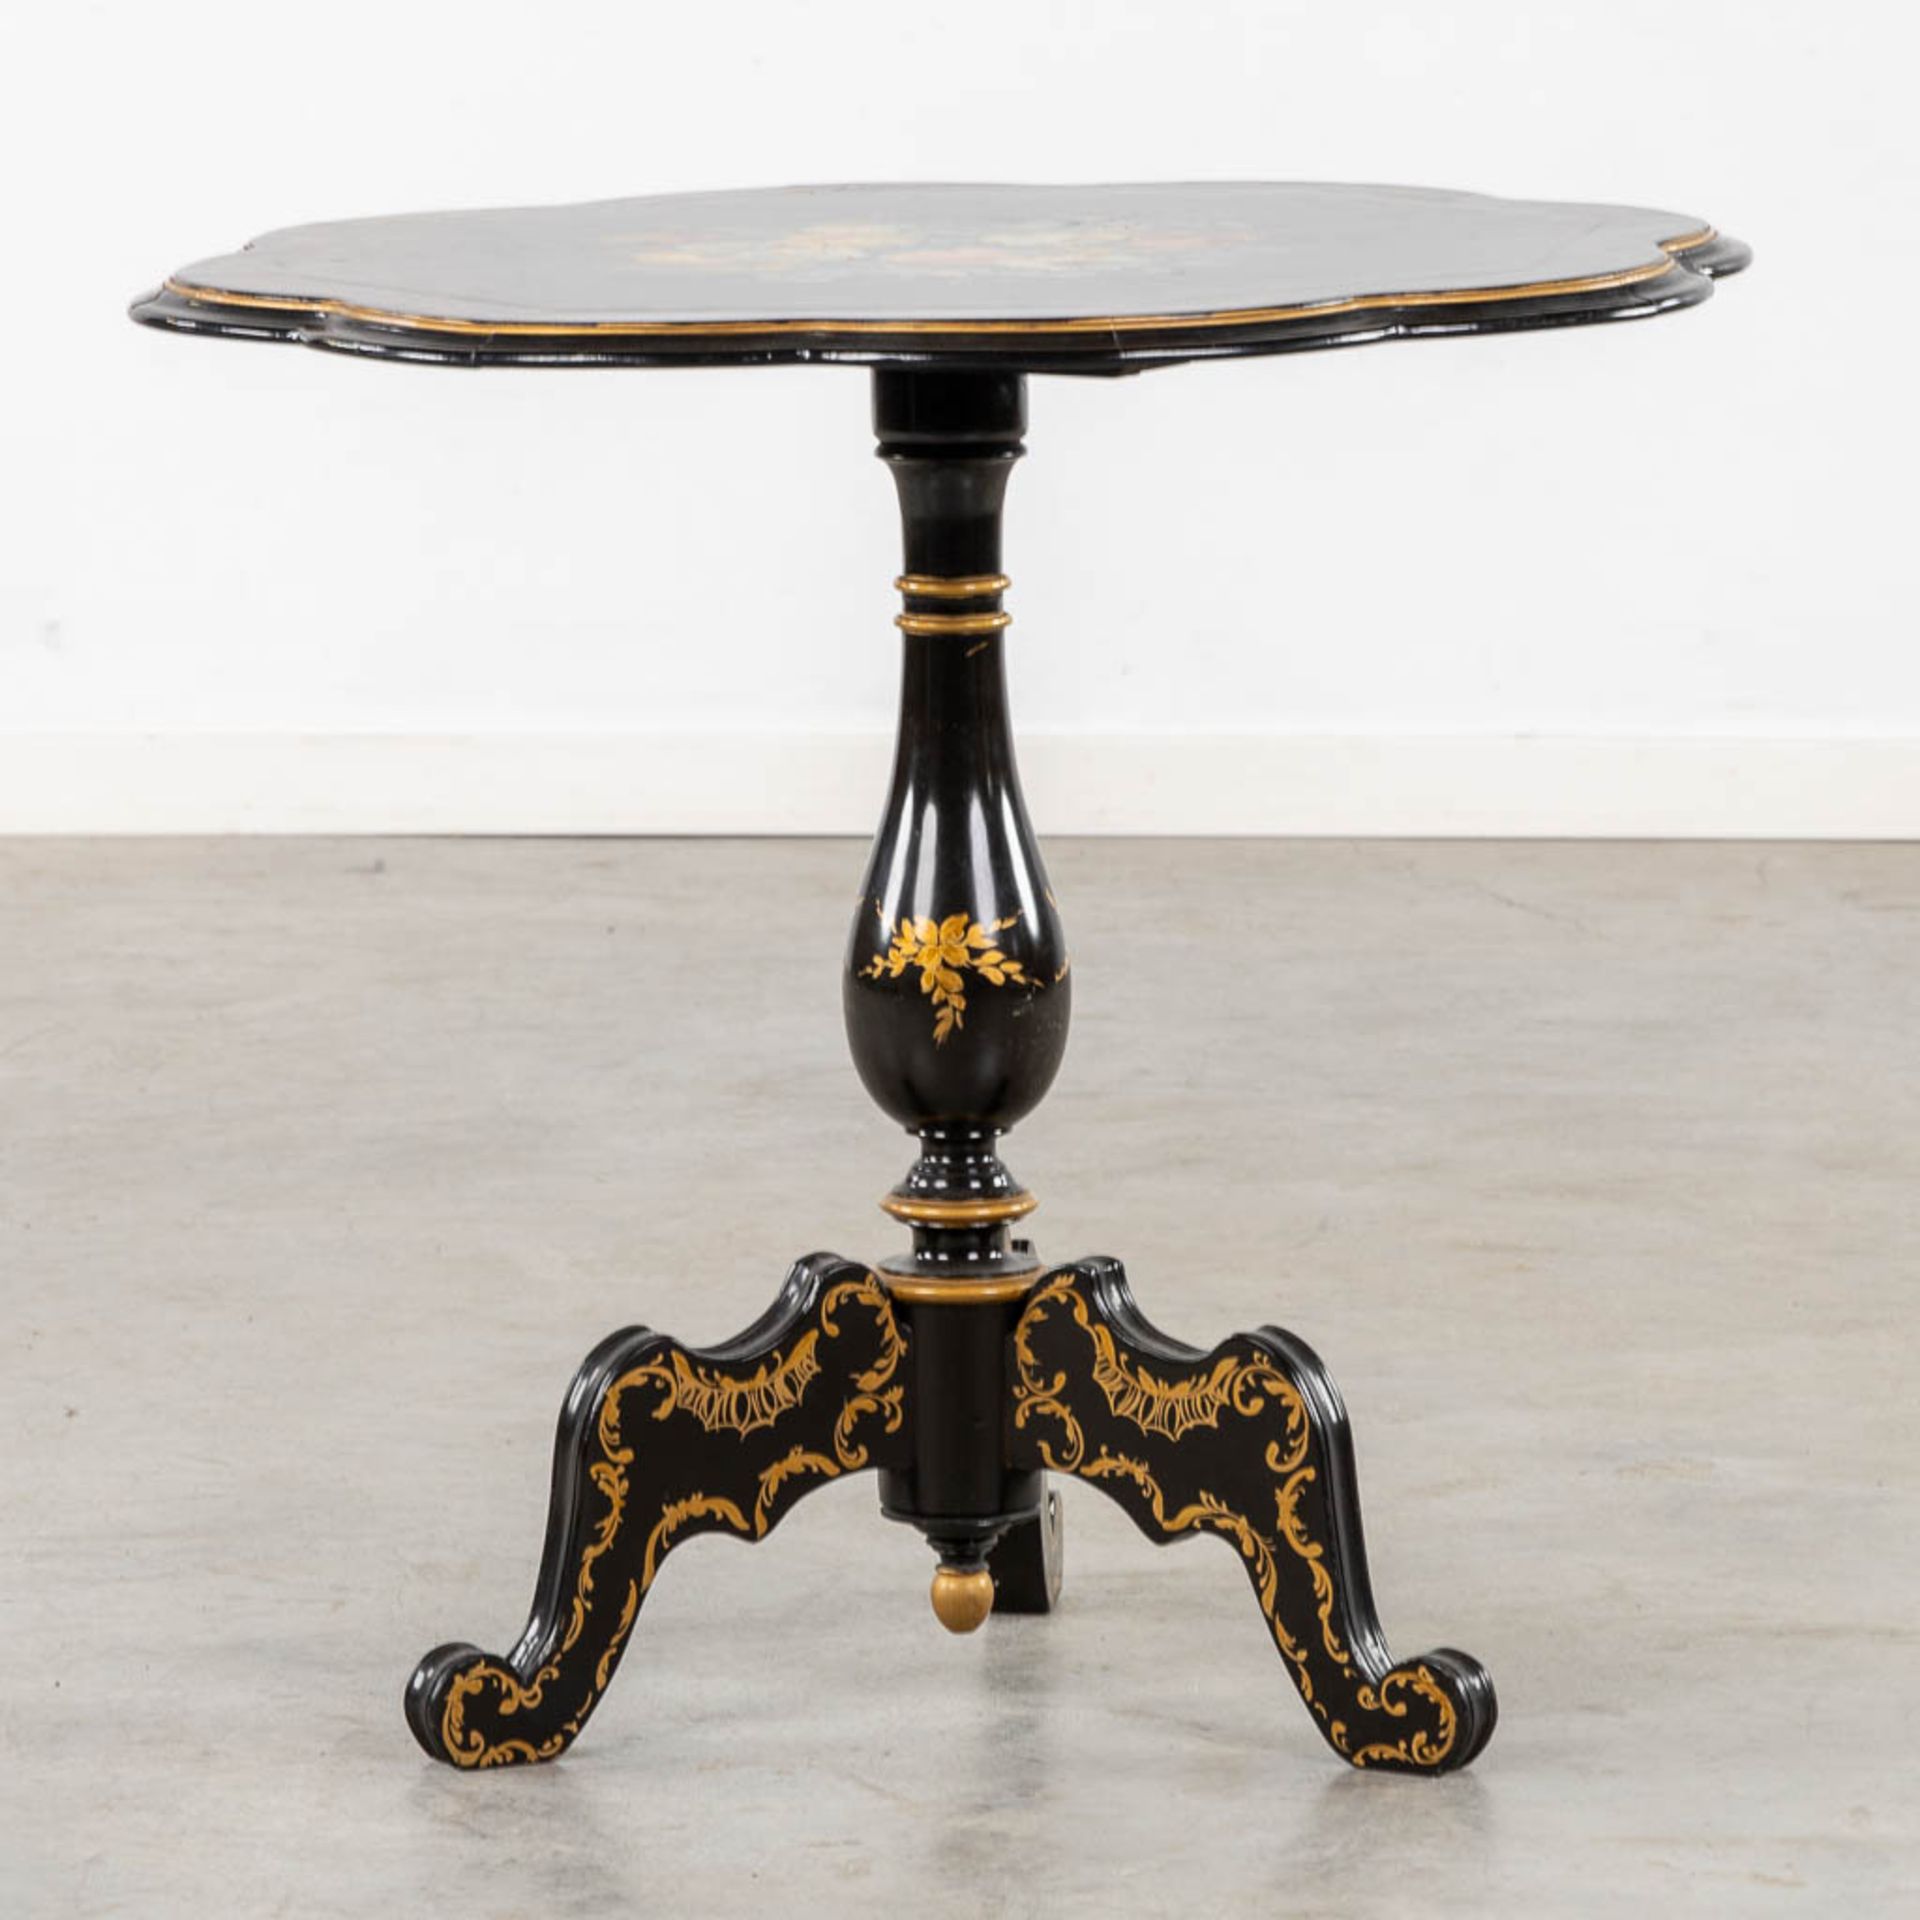 A Tilt-Top table with hand-painted floral decor, Napoleon 3 style. (H:67 x D:72 cm) - Image 5 of 9